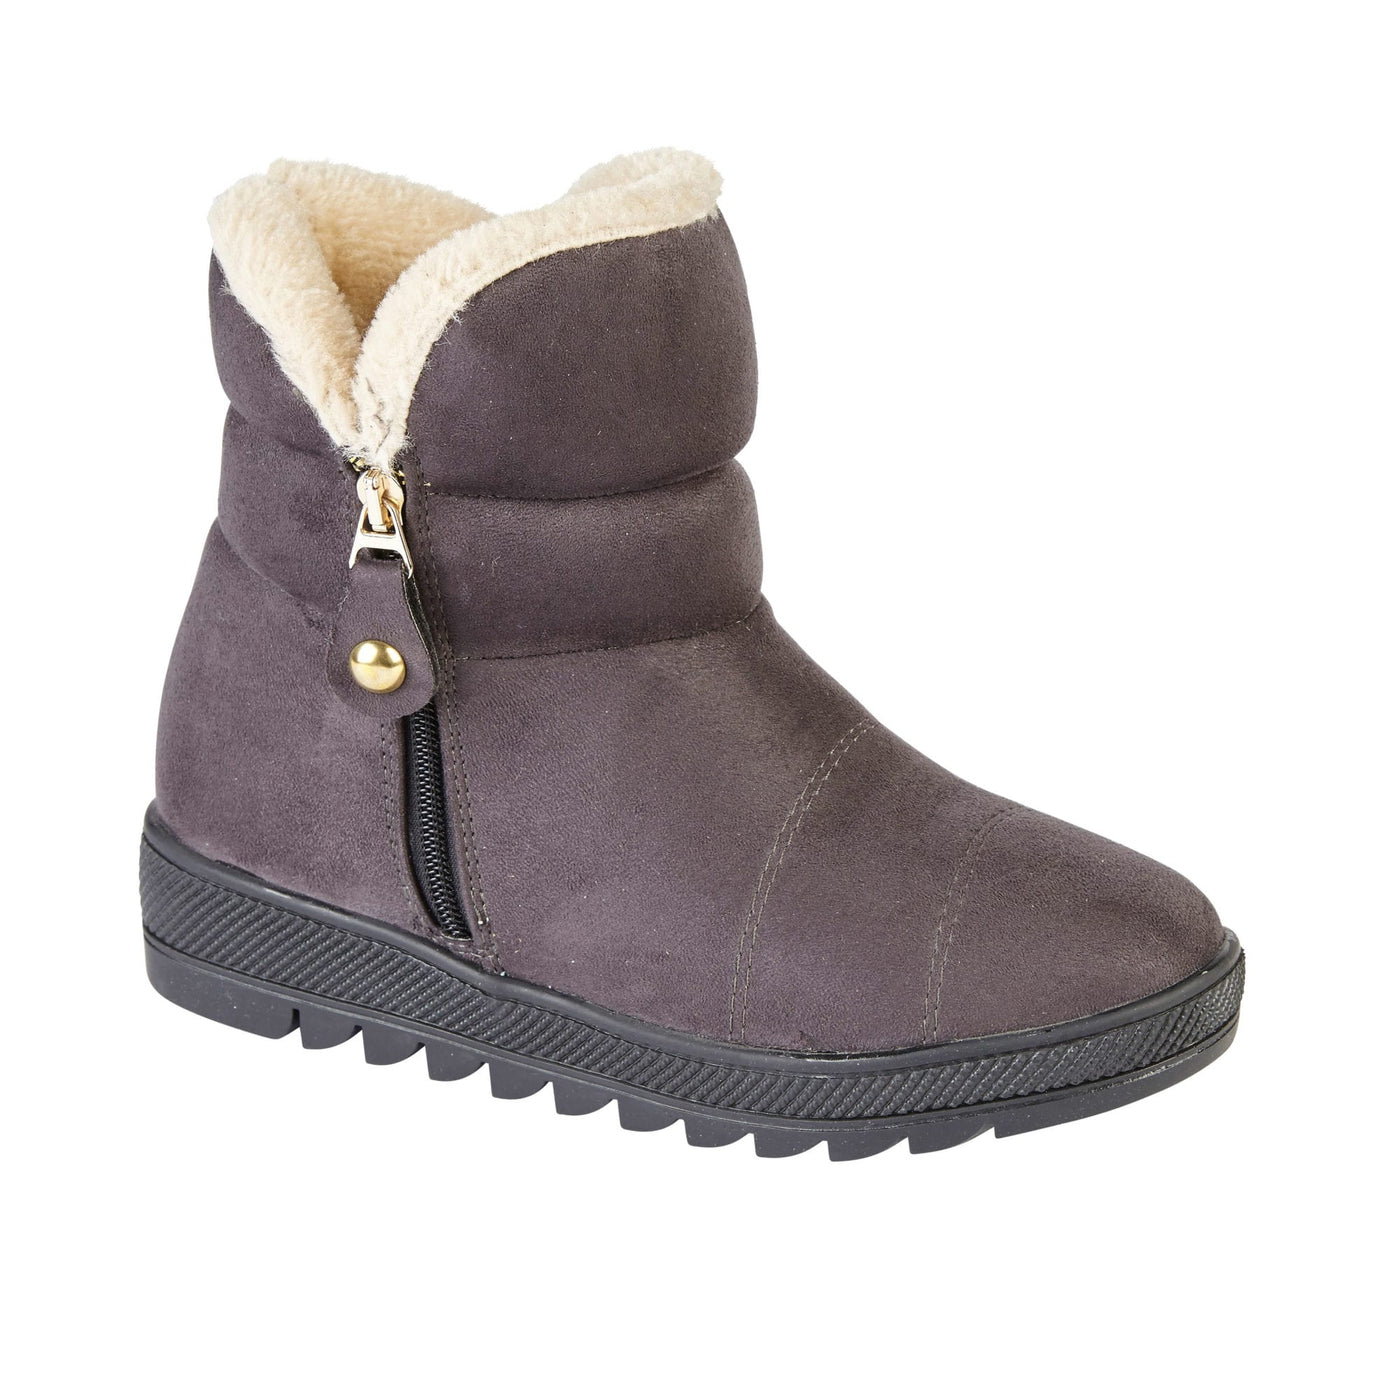 Ladies Courchevel Fur Lined Ankle Boot 